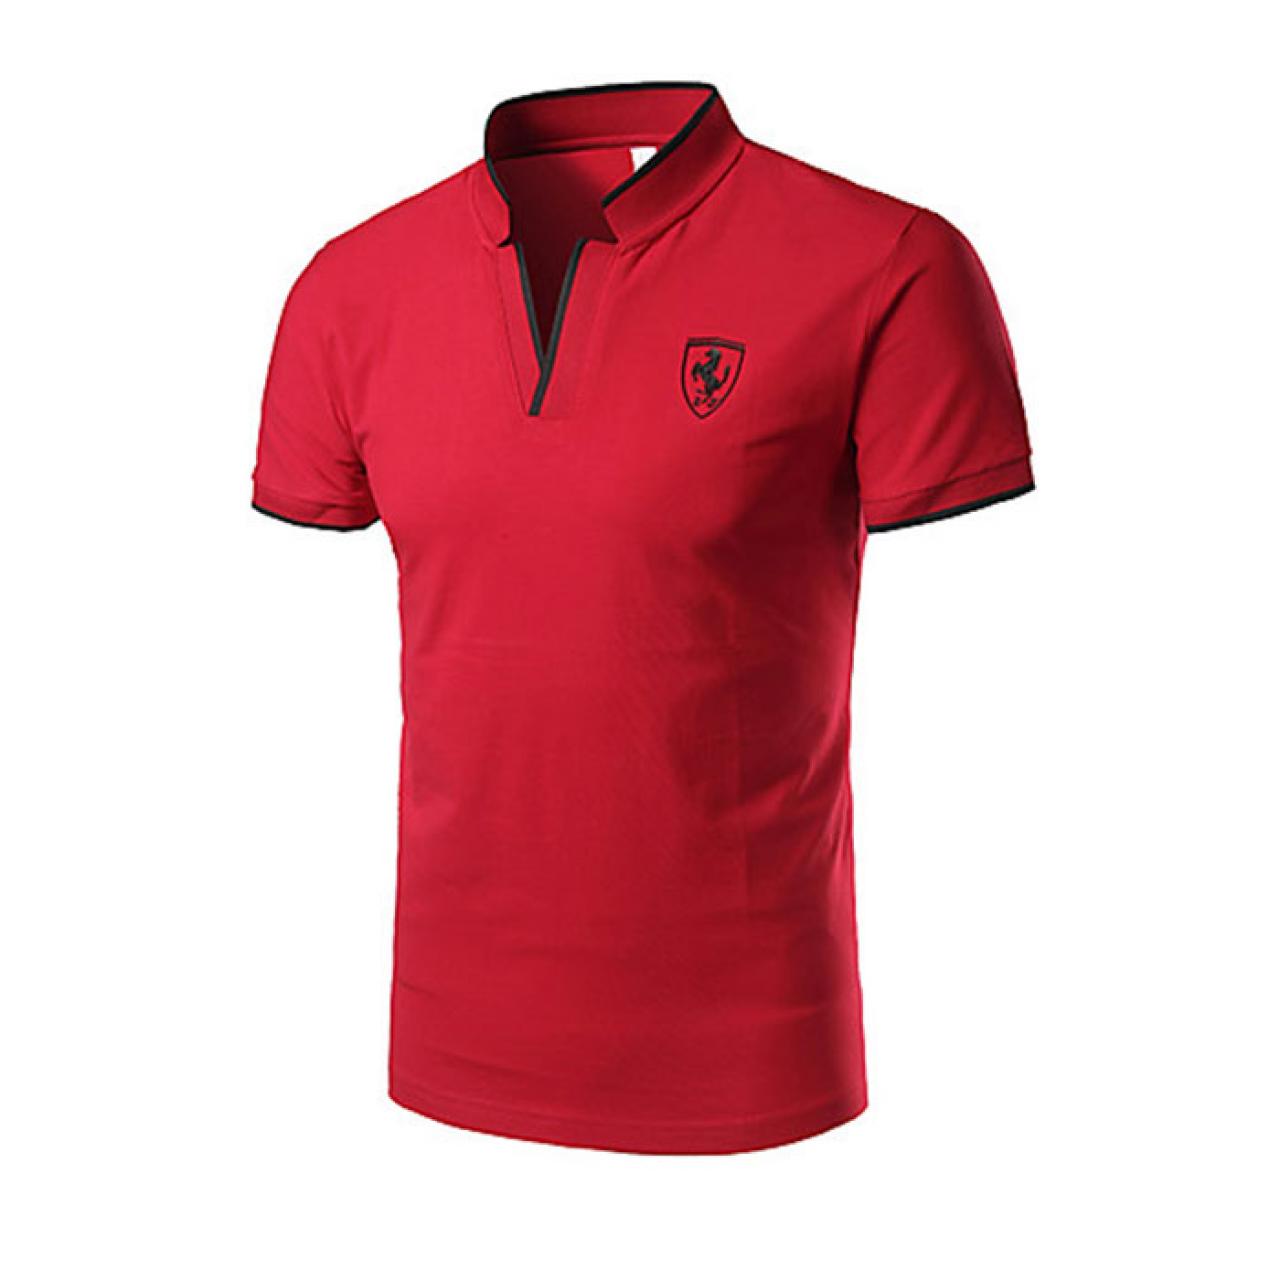 Men's New Short Collared Red Tees